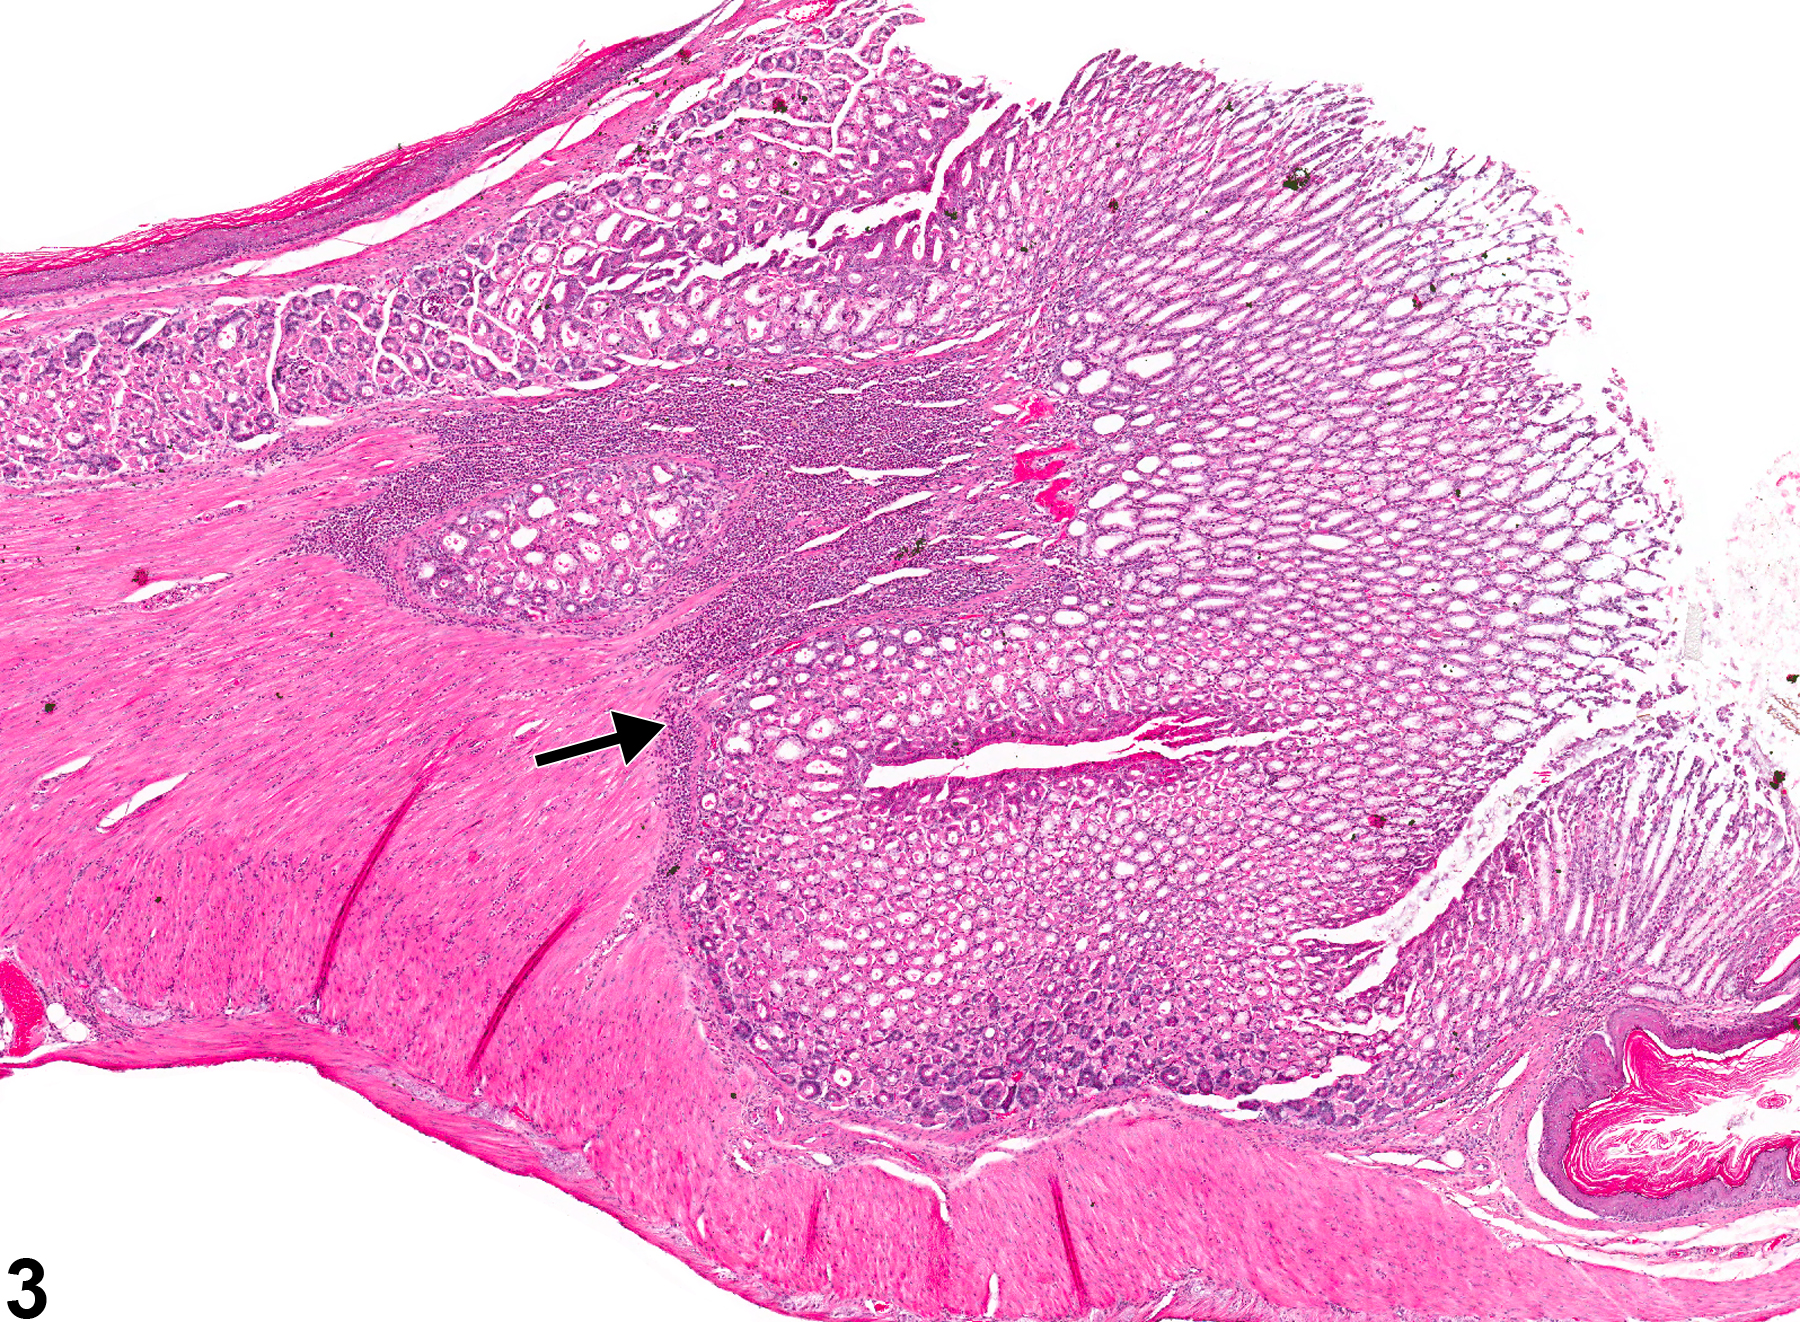 Image of inflammation in the glandular stomach from a male B6C3F1 mouse in a chronic study